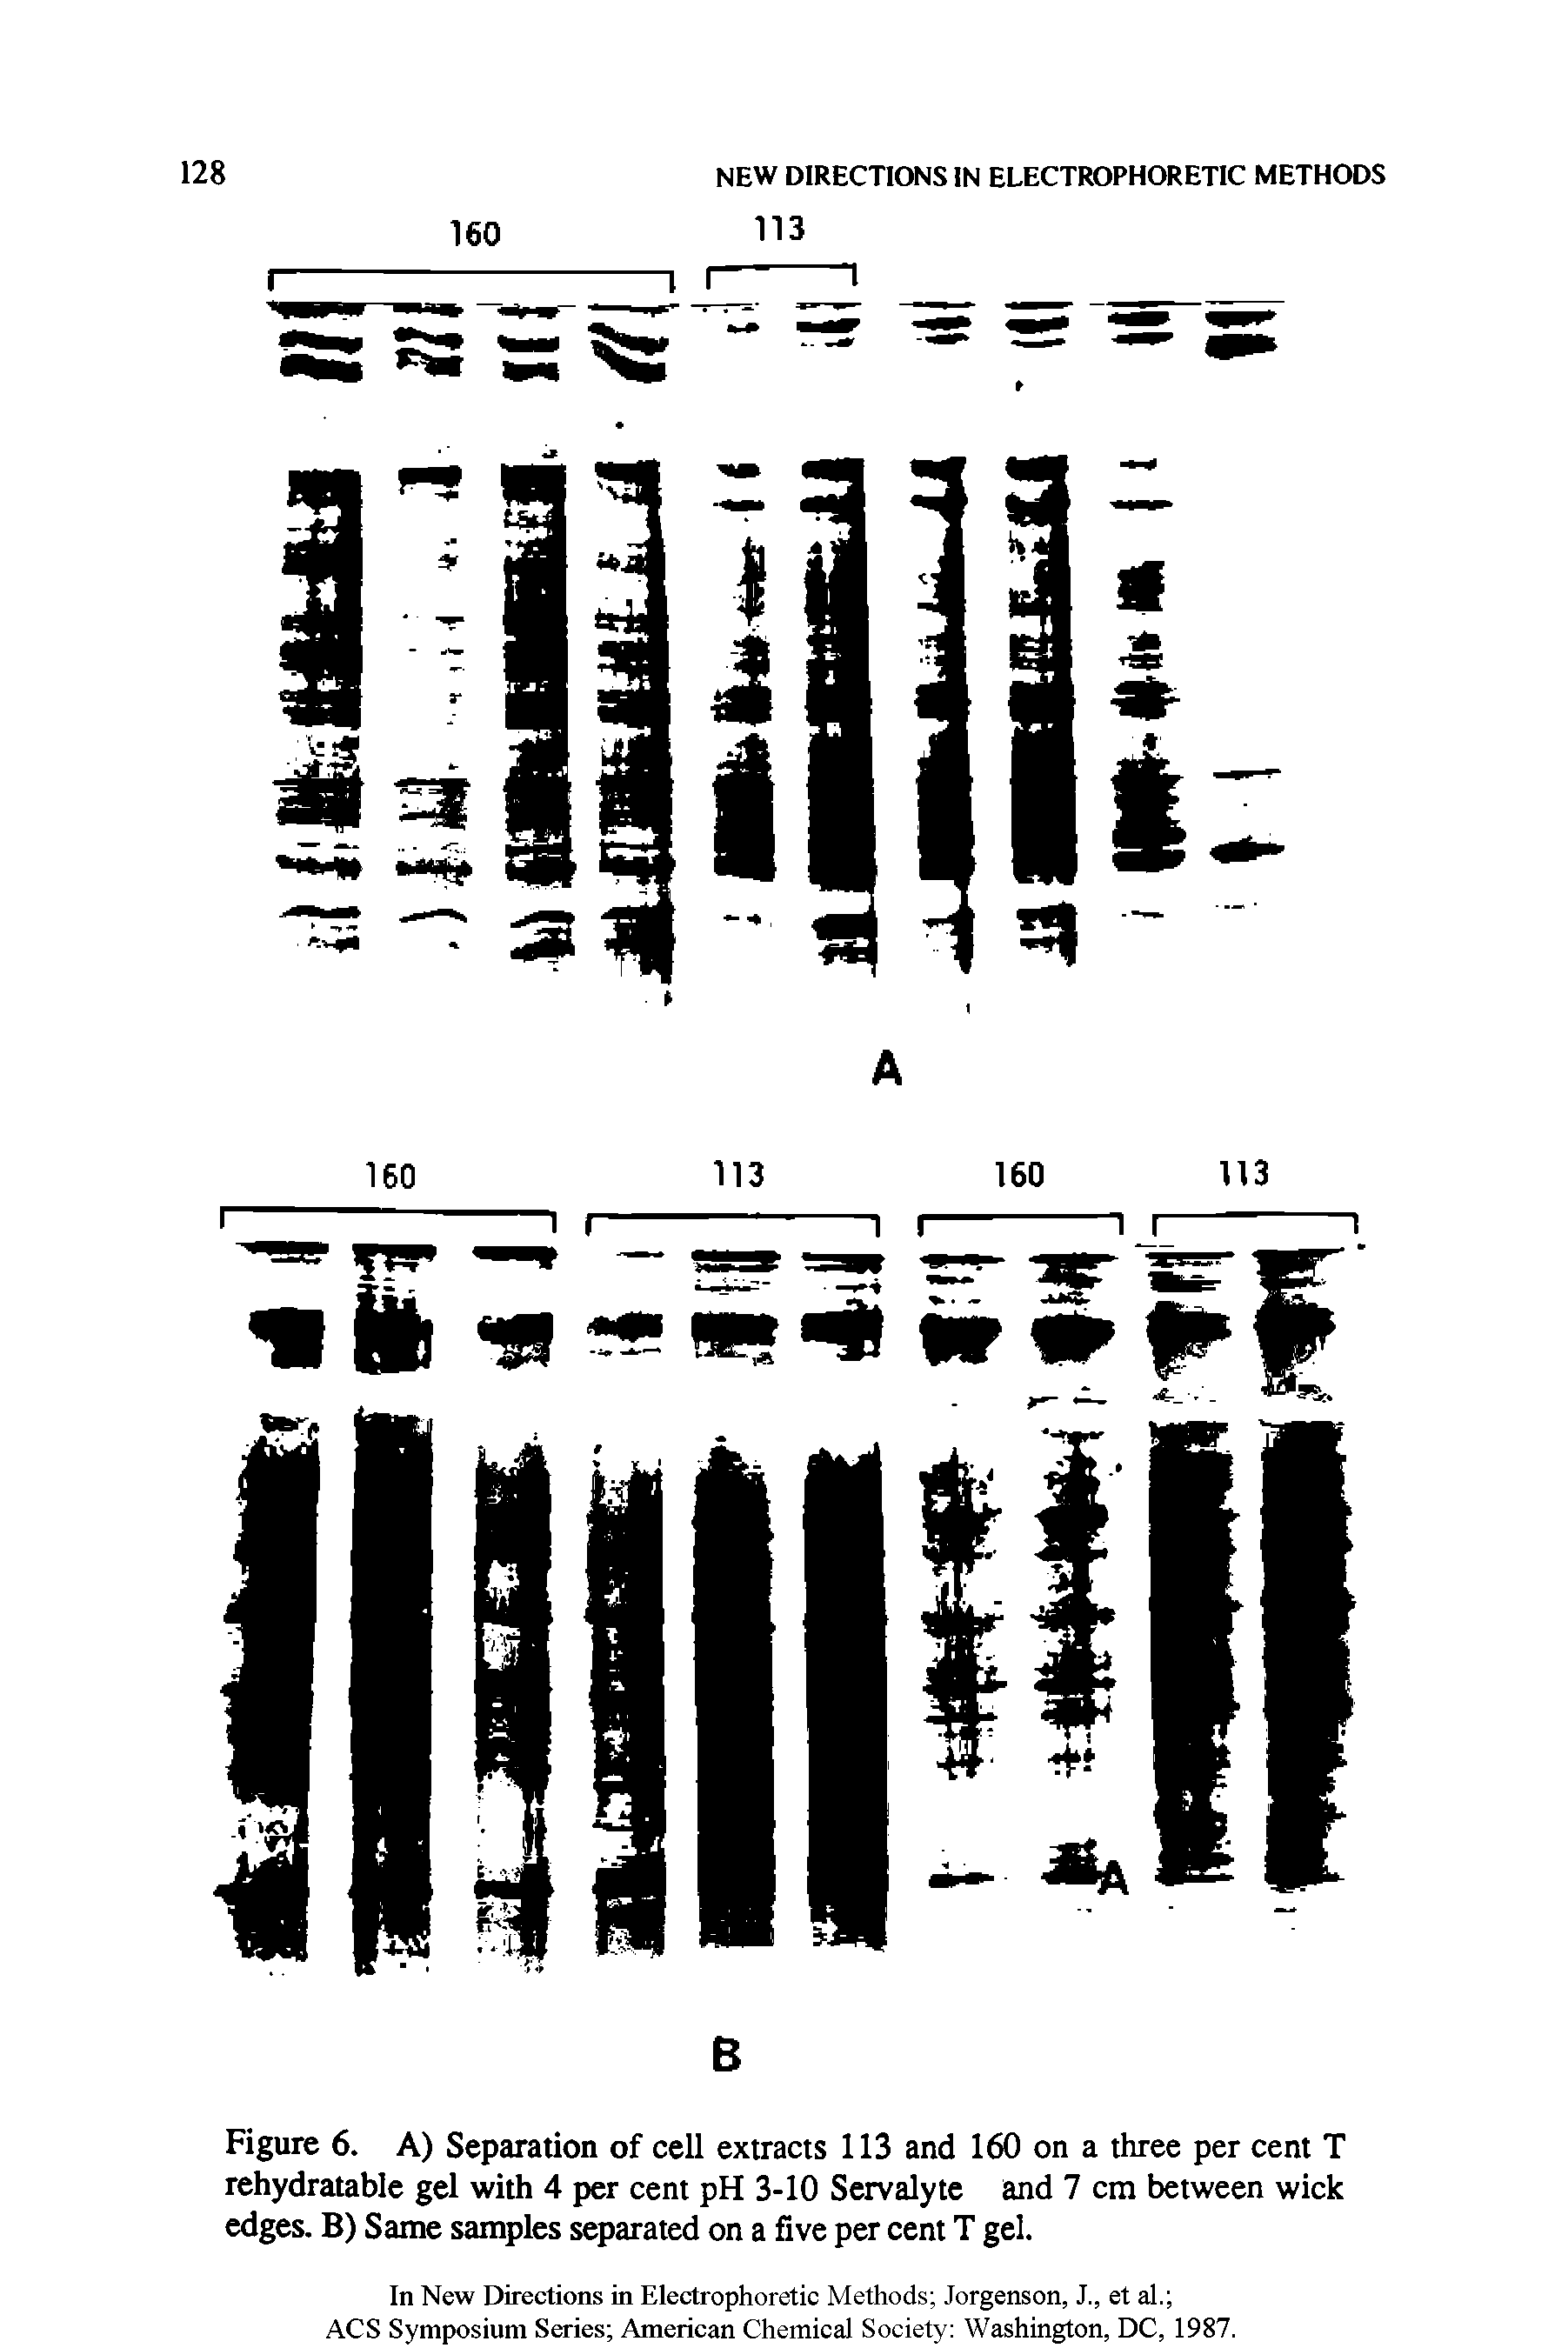 Figure 6. A) Separation of cell extracts 113 and 160 on a three per cent T rehydratable gel with 4 per cent pH 3-10 Servalyte and 7 cm between wick edges. B) Same samples separated on a five per cent T gel.